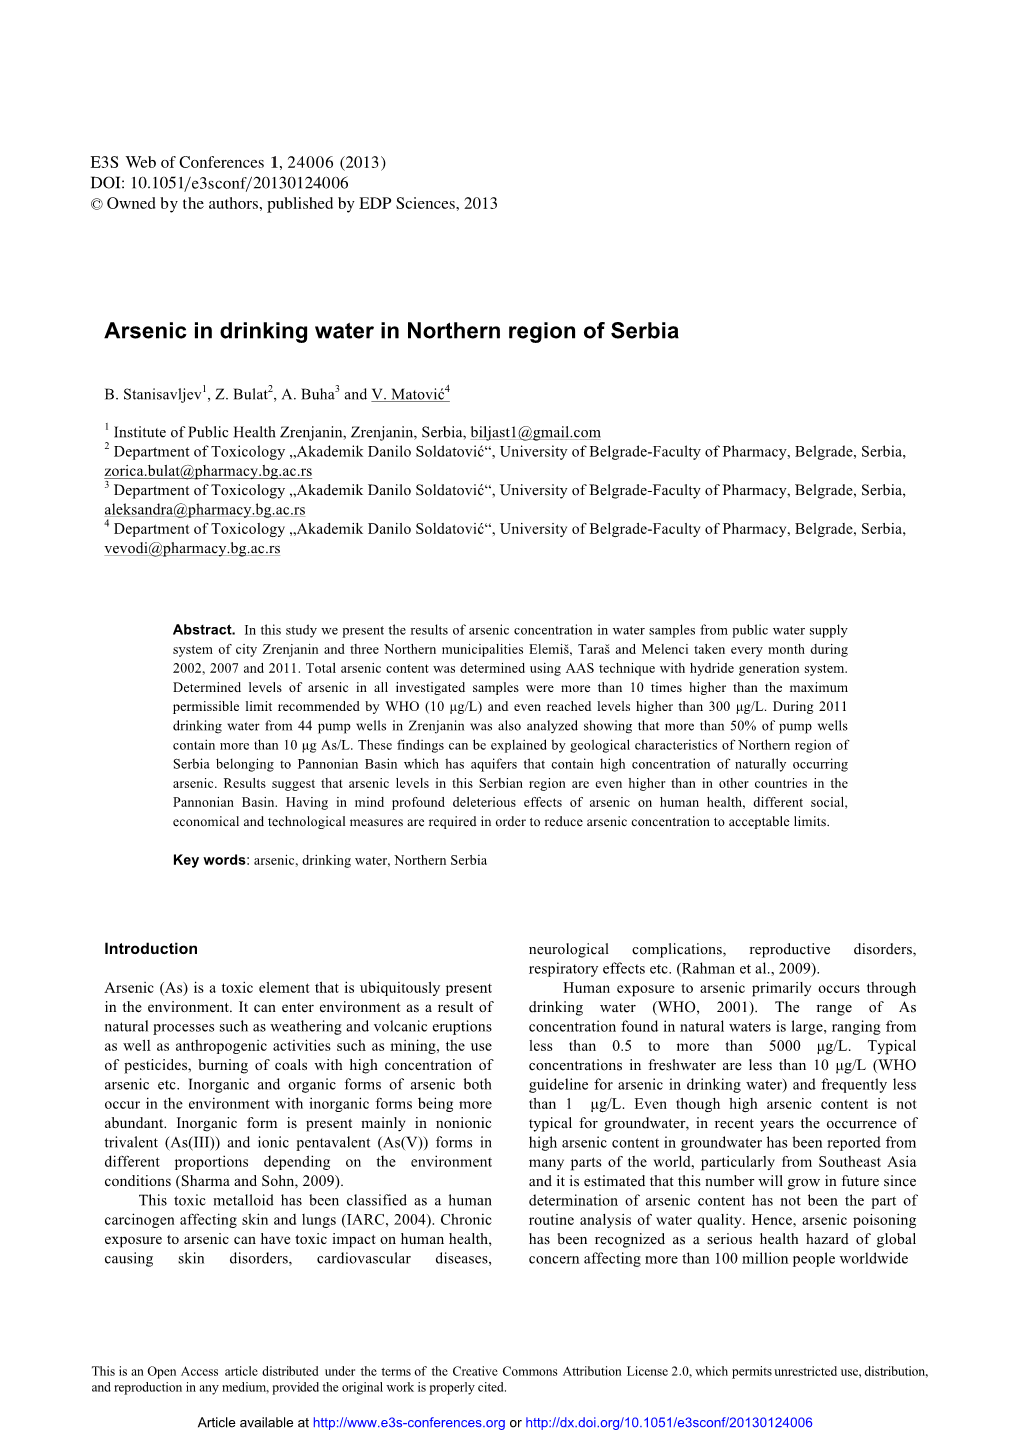 Arsenic in Drinking Water in Northern Region of Serbia